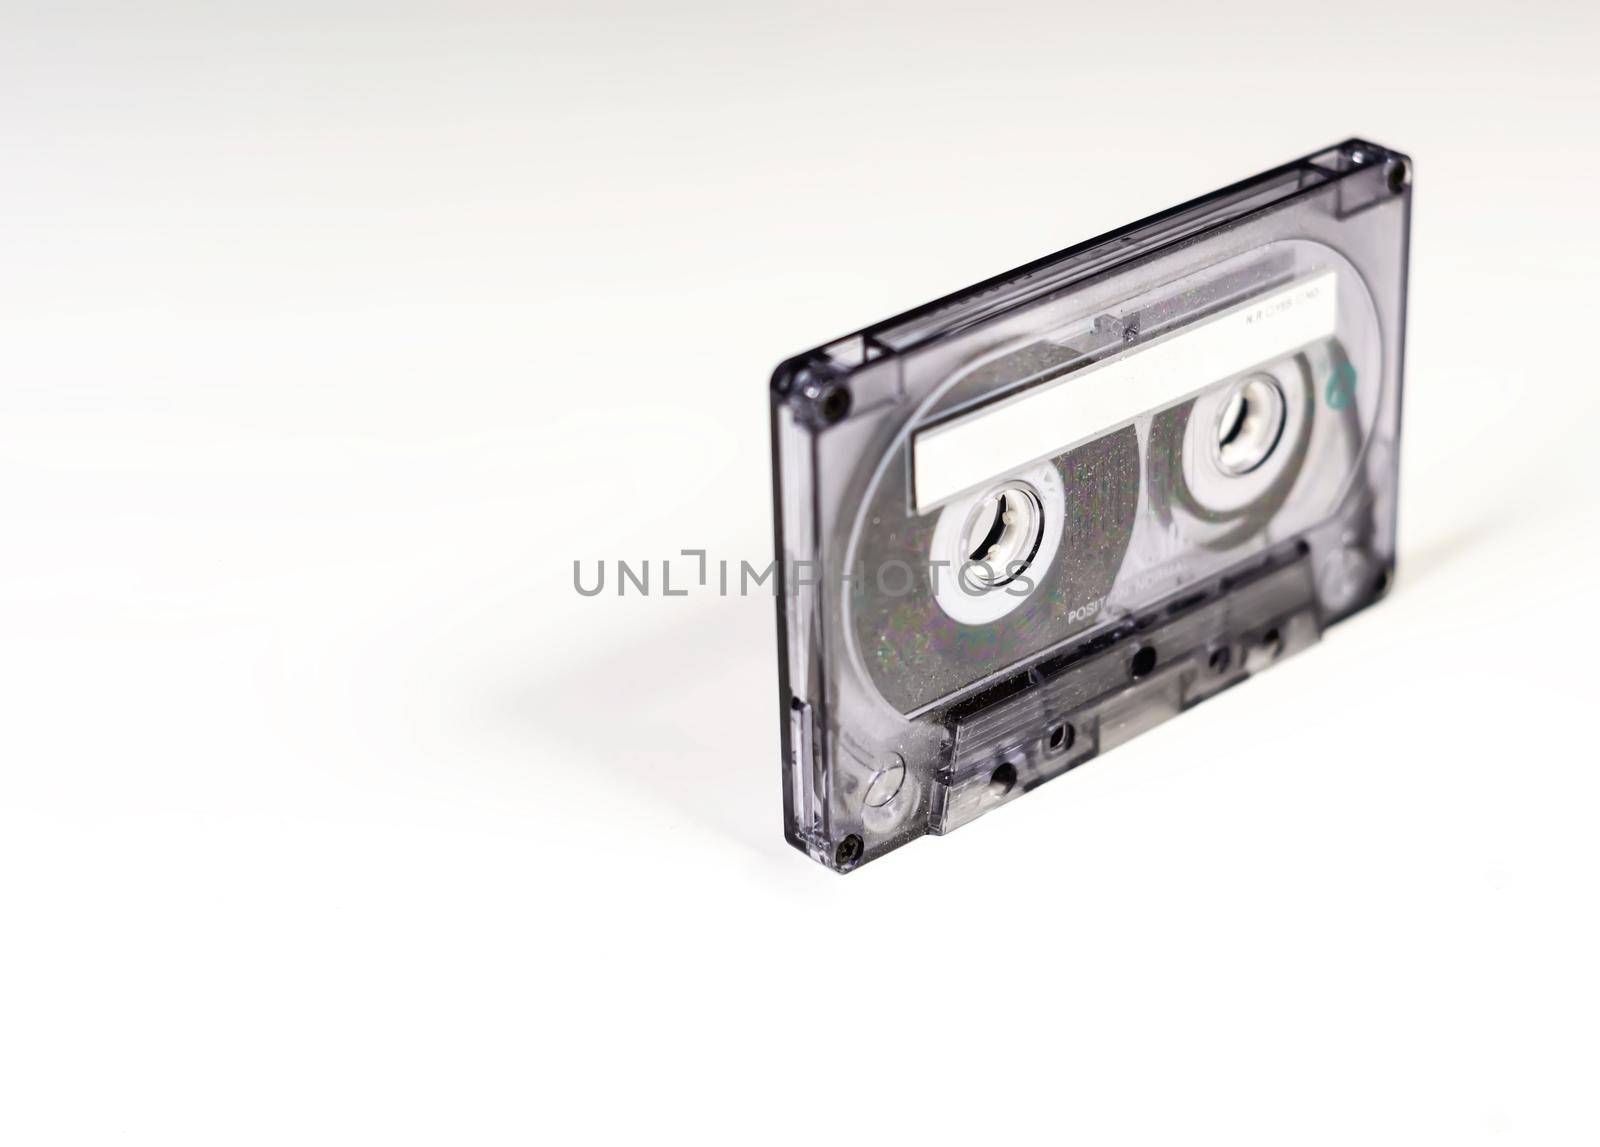 Transparent 90 minute audio cassette with blank adhesive label. Side A of the cassette. Magnetic tape and audio reproduction from the 70s and 80s. Vintage object